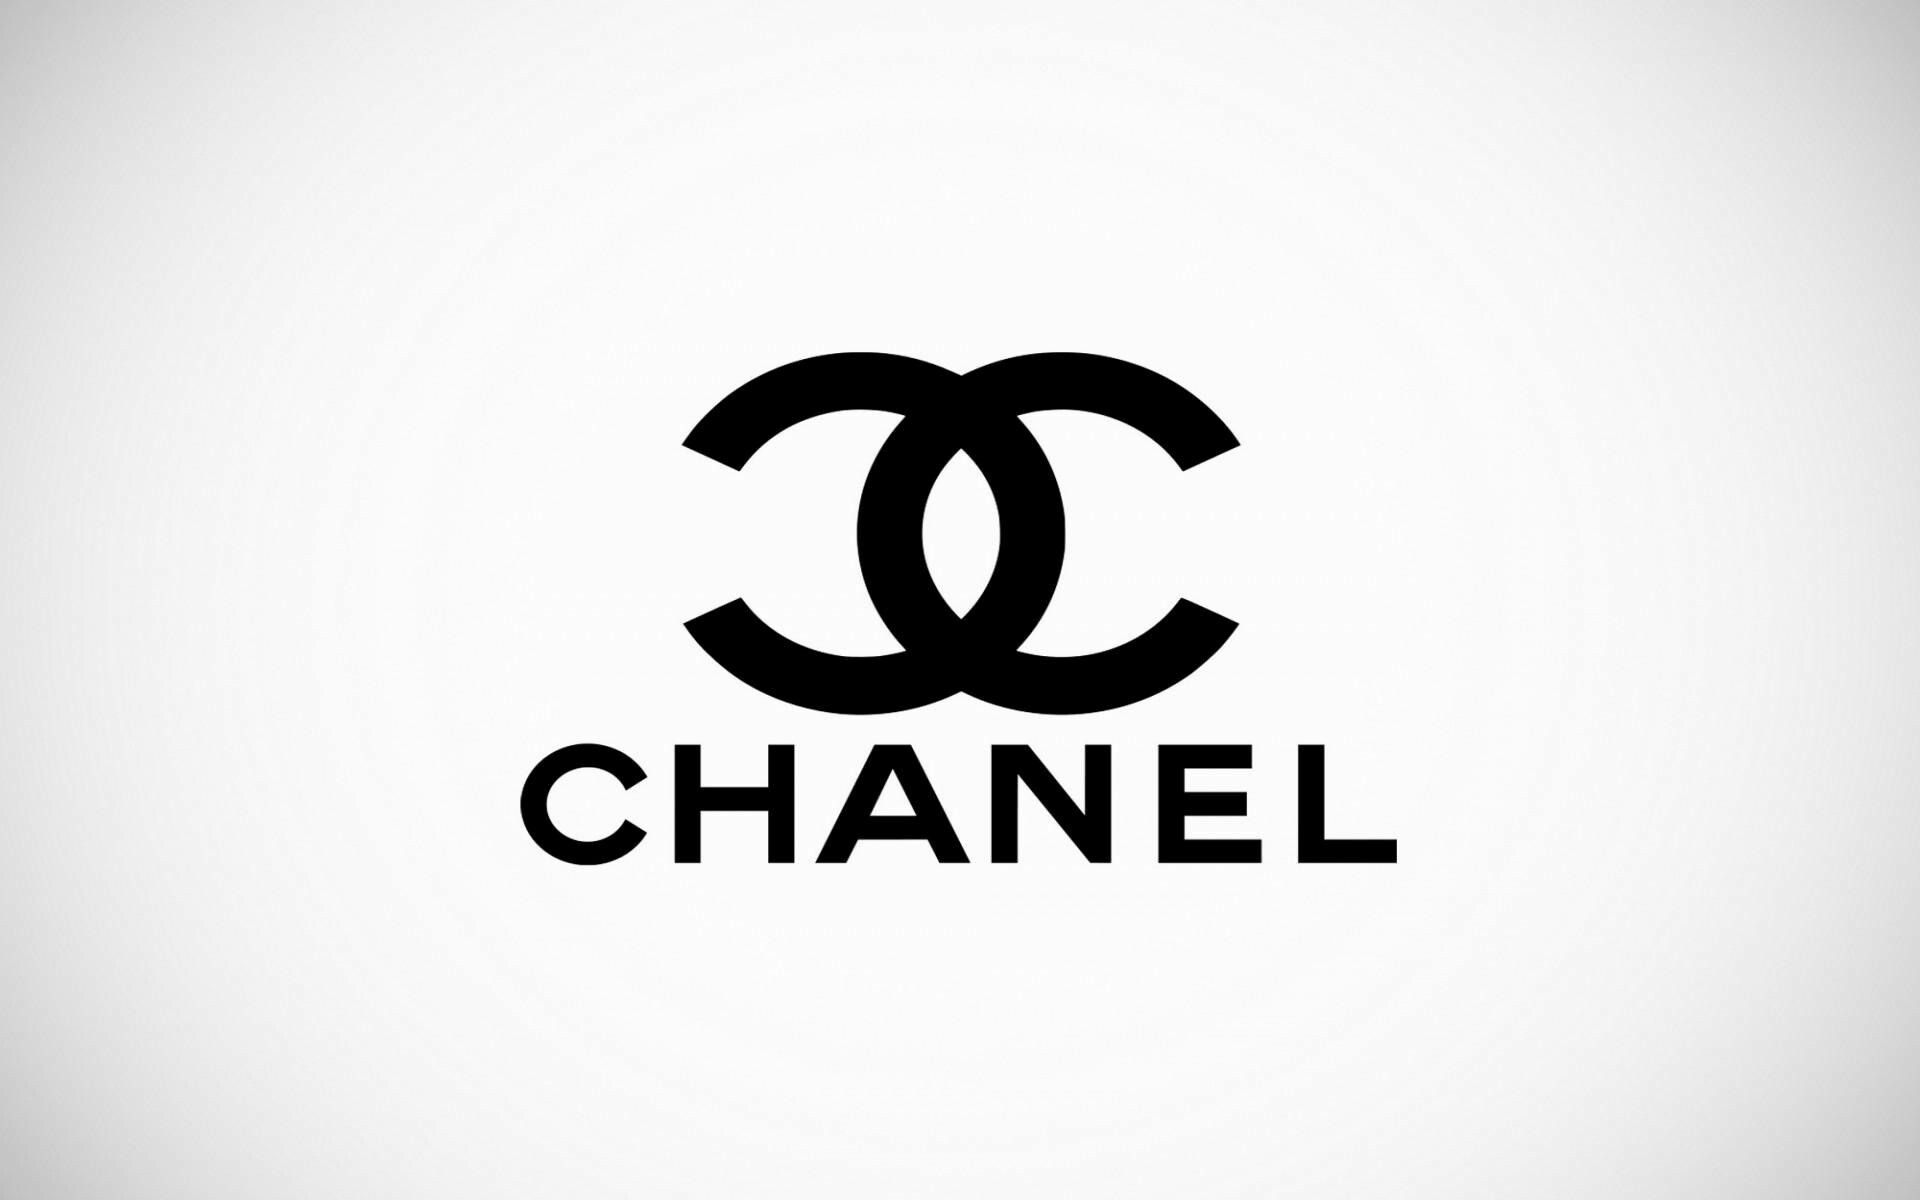 Chanel: Brought function and flattery to haute couture and pret-a-porter. 1920x1200 HD Wallpaper.